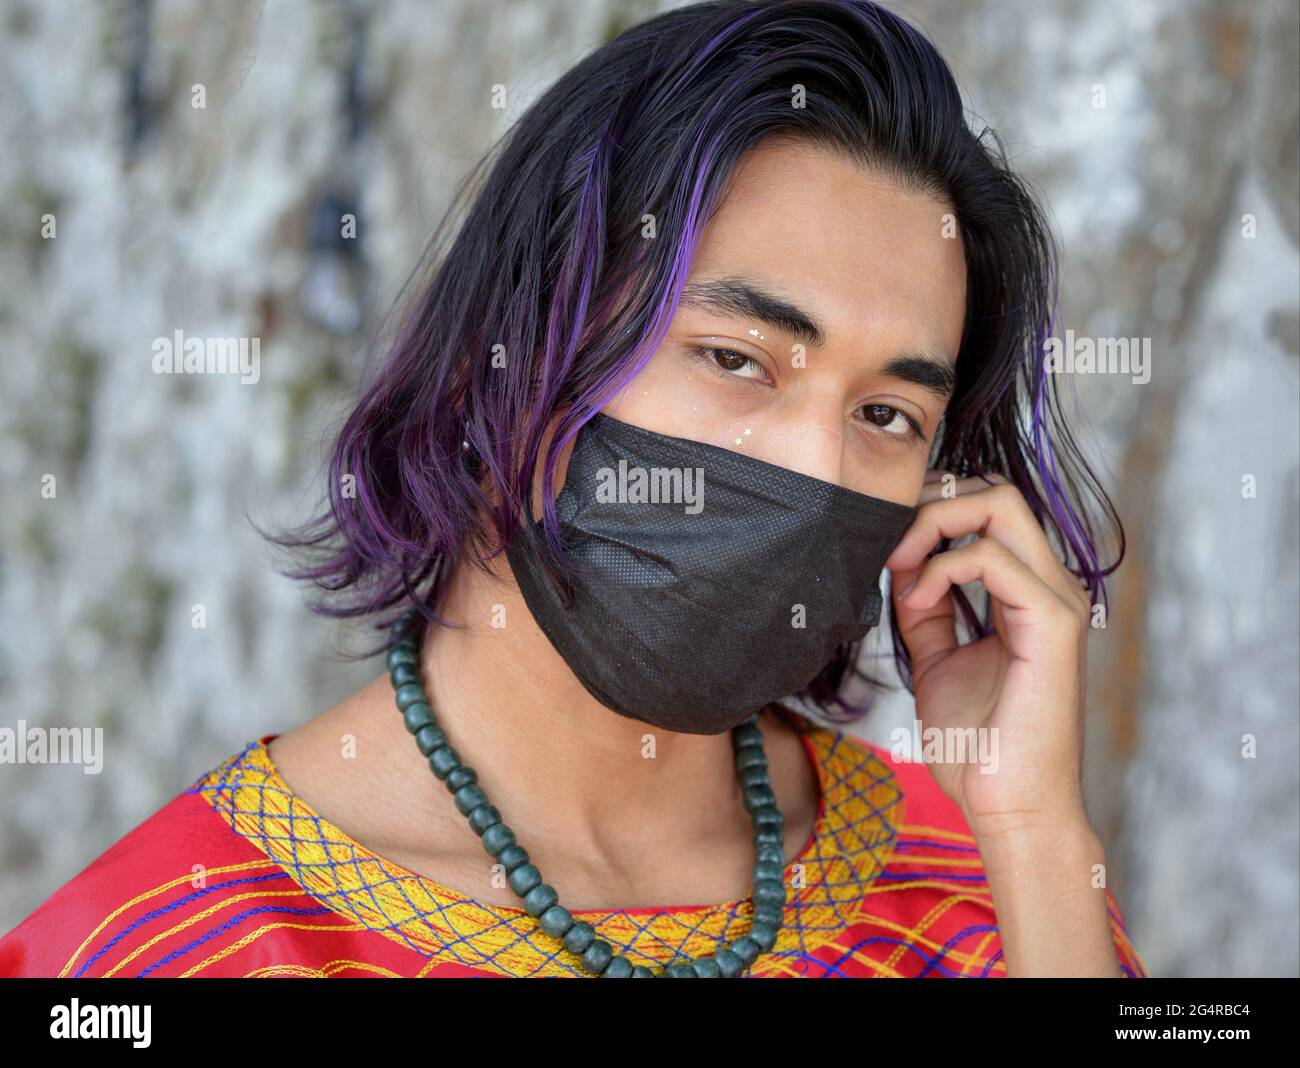 Handsome young Mexican man with a blue purple dyed hair streak wears a  black face mask during the global coronavirus pandemic and looks at the  camera Stock Photo - Alamy